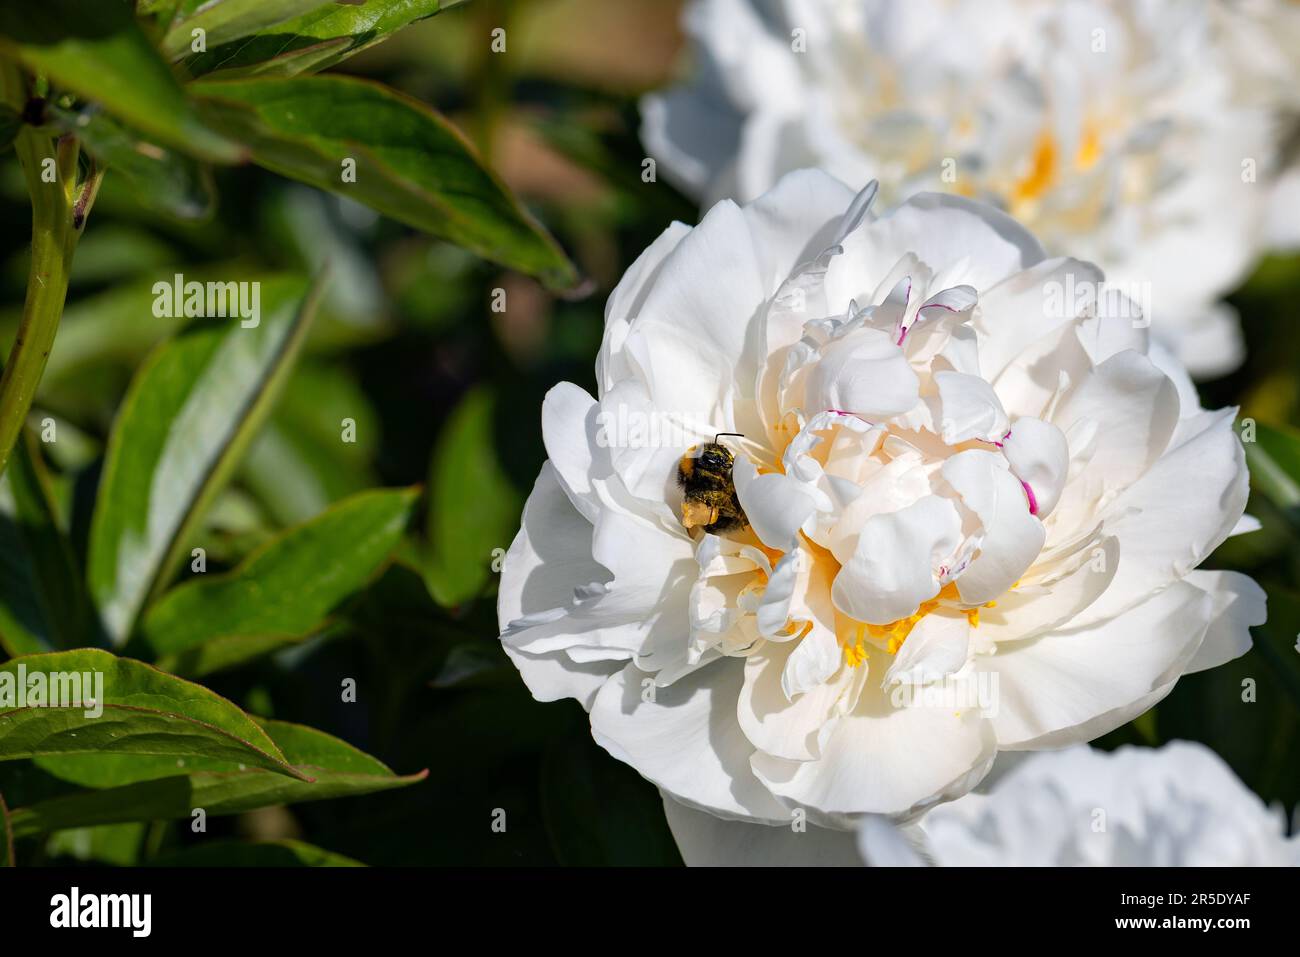 On a blooming white peony, a plump bumblebee collects nectar and pollen against a dark green background of foliage in bright sunlight. Copy space. Stock Photo